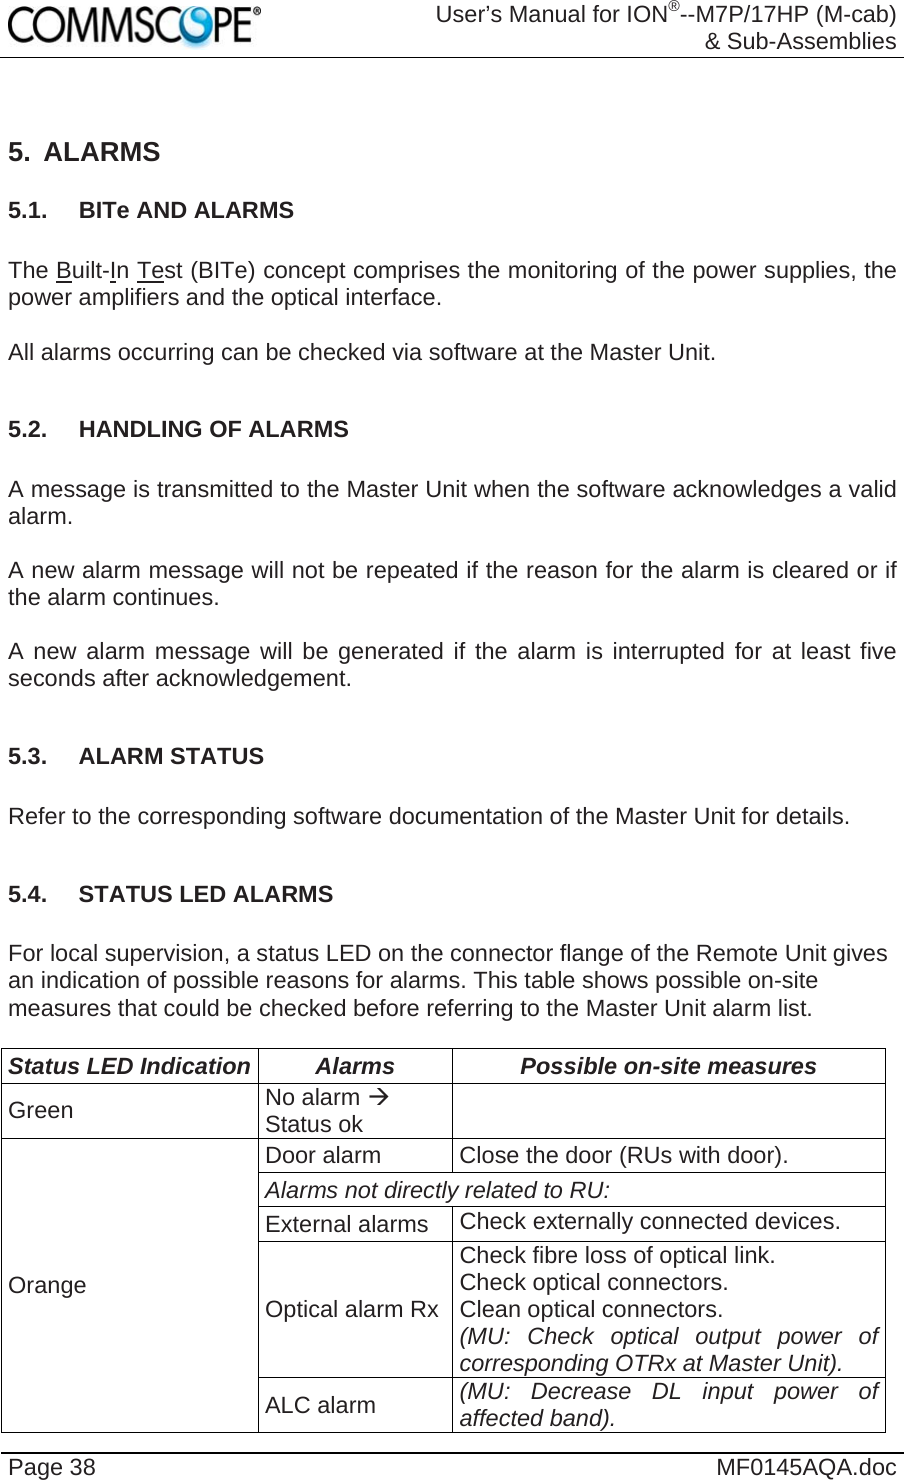  User’s Manual for ION®--M7P/17HP (M-cab) &amp; Sub-Assemblies Page 38  MF0145AQA.doc   5. ALARMS 5.1.  BITe AND ALARMS  The Built-In Test (BITe) concept comprises the monitoring of the power supplies, the power amplifiers and the optical interface.  All alarms occurring can be checked via software at the Master Unit.  5.2. HANDLING OF ALARMS  A message is transmitted to the Master Unit when the software acknowledges a valid alarm.  A new alarm message will not be repeated if the reason for the alarm is cleared or if the alarm continues.  A new alarm message will be generated if the alarm is interrupted for at least five seconds after acknowledgement.  5.3. ALARM STATUS  Refer to the corresponding software documentation of the Master Unit for details.  5.4.  STATUS LED ALARMS  For local supervision, a status LED on the connector flange of the Remote Unit gives an indication of possible reasons for alarms. This table shows possible on-site measures that could be checked before referring to the Master Unit alarm list.  Status LED Indication  Alarms  Possible on-site measures Green  No alarm  Status ok   Orange Door alarm  Close the door (RUs with door). Alarms not directly related to RU:  External alarms  Check externally connected devices. Optical alarm Rx Check fibre loss of optical link. Check optical connectors. Clean optical connectors. (MU: Check optical output power of corresponding OTRx at Master Unit). ALC alarm  (MU: Decrease DL input power of affected band). 